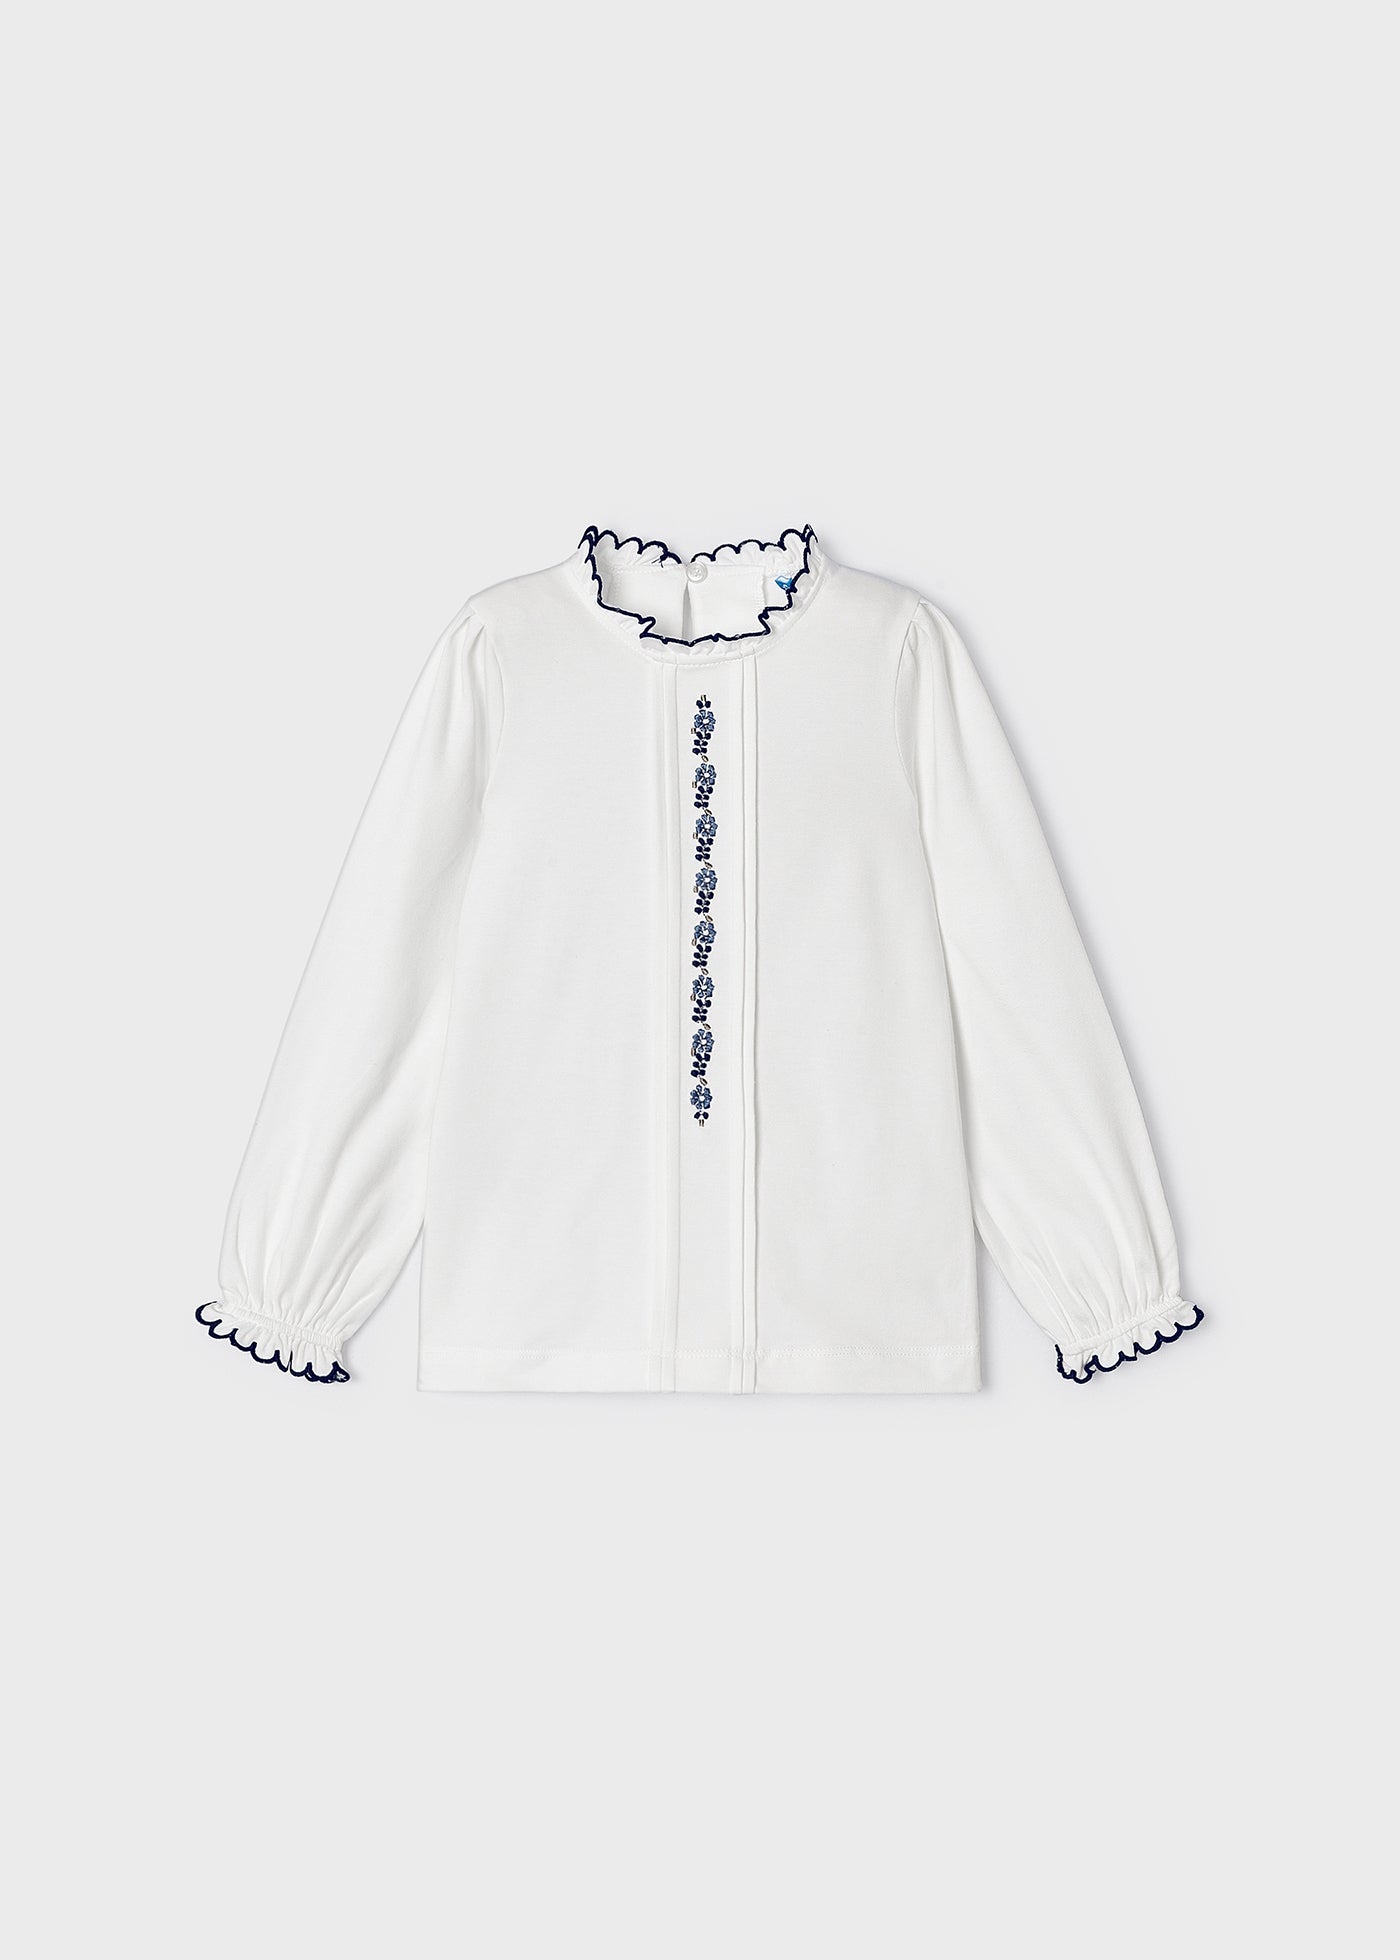 Mayoral Mini Off White & Navy Floral Embroidery Detail Blouse _4196-32